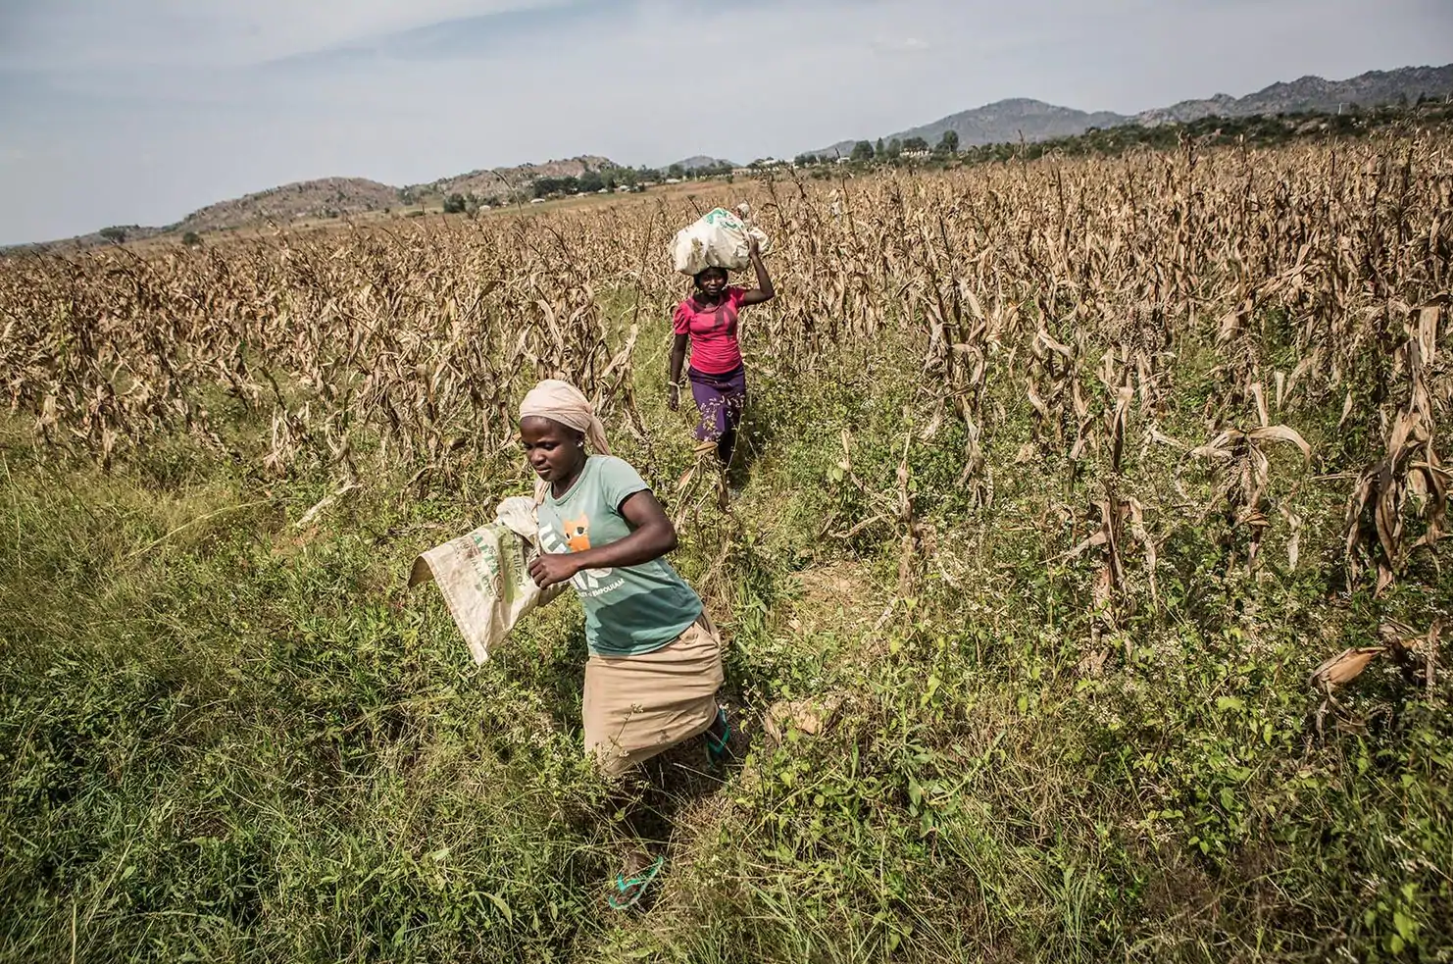 Farmers Cynthia Thomas, 15, and Rebecca Sylvanos, 31, carry bags of maize to their car in Barkin Ladi on Oct. 24. Image by Jane Hahn. Nigeria, 2018.